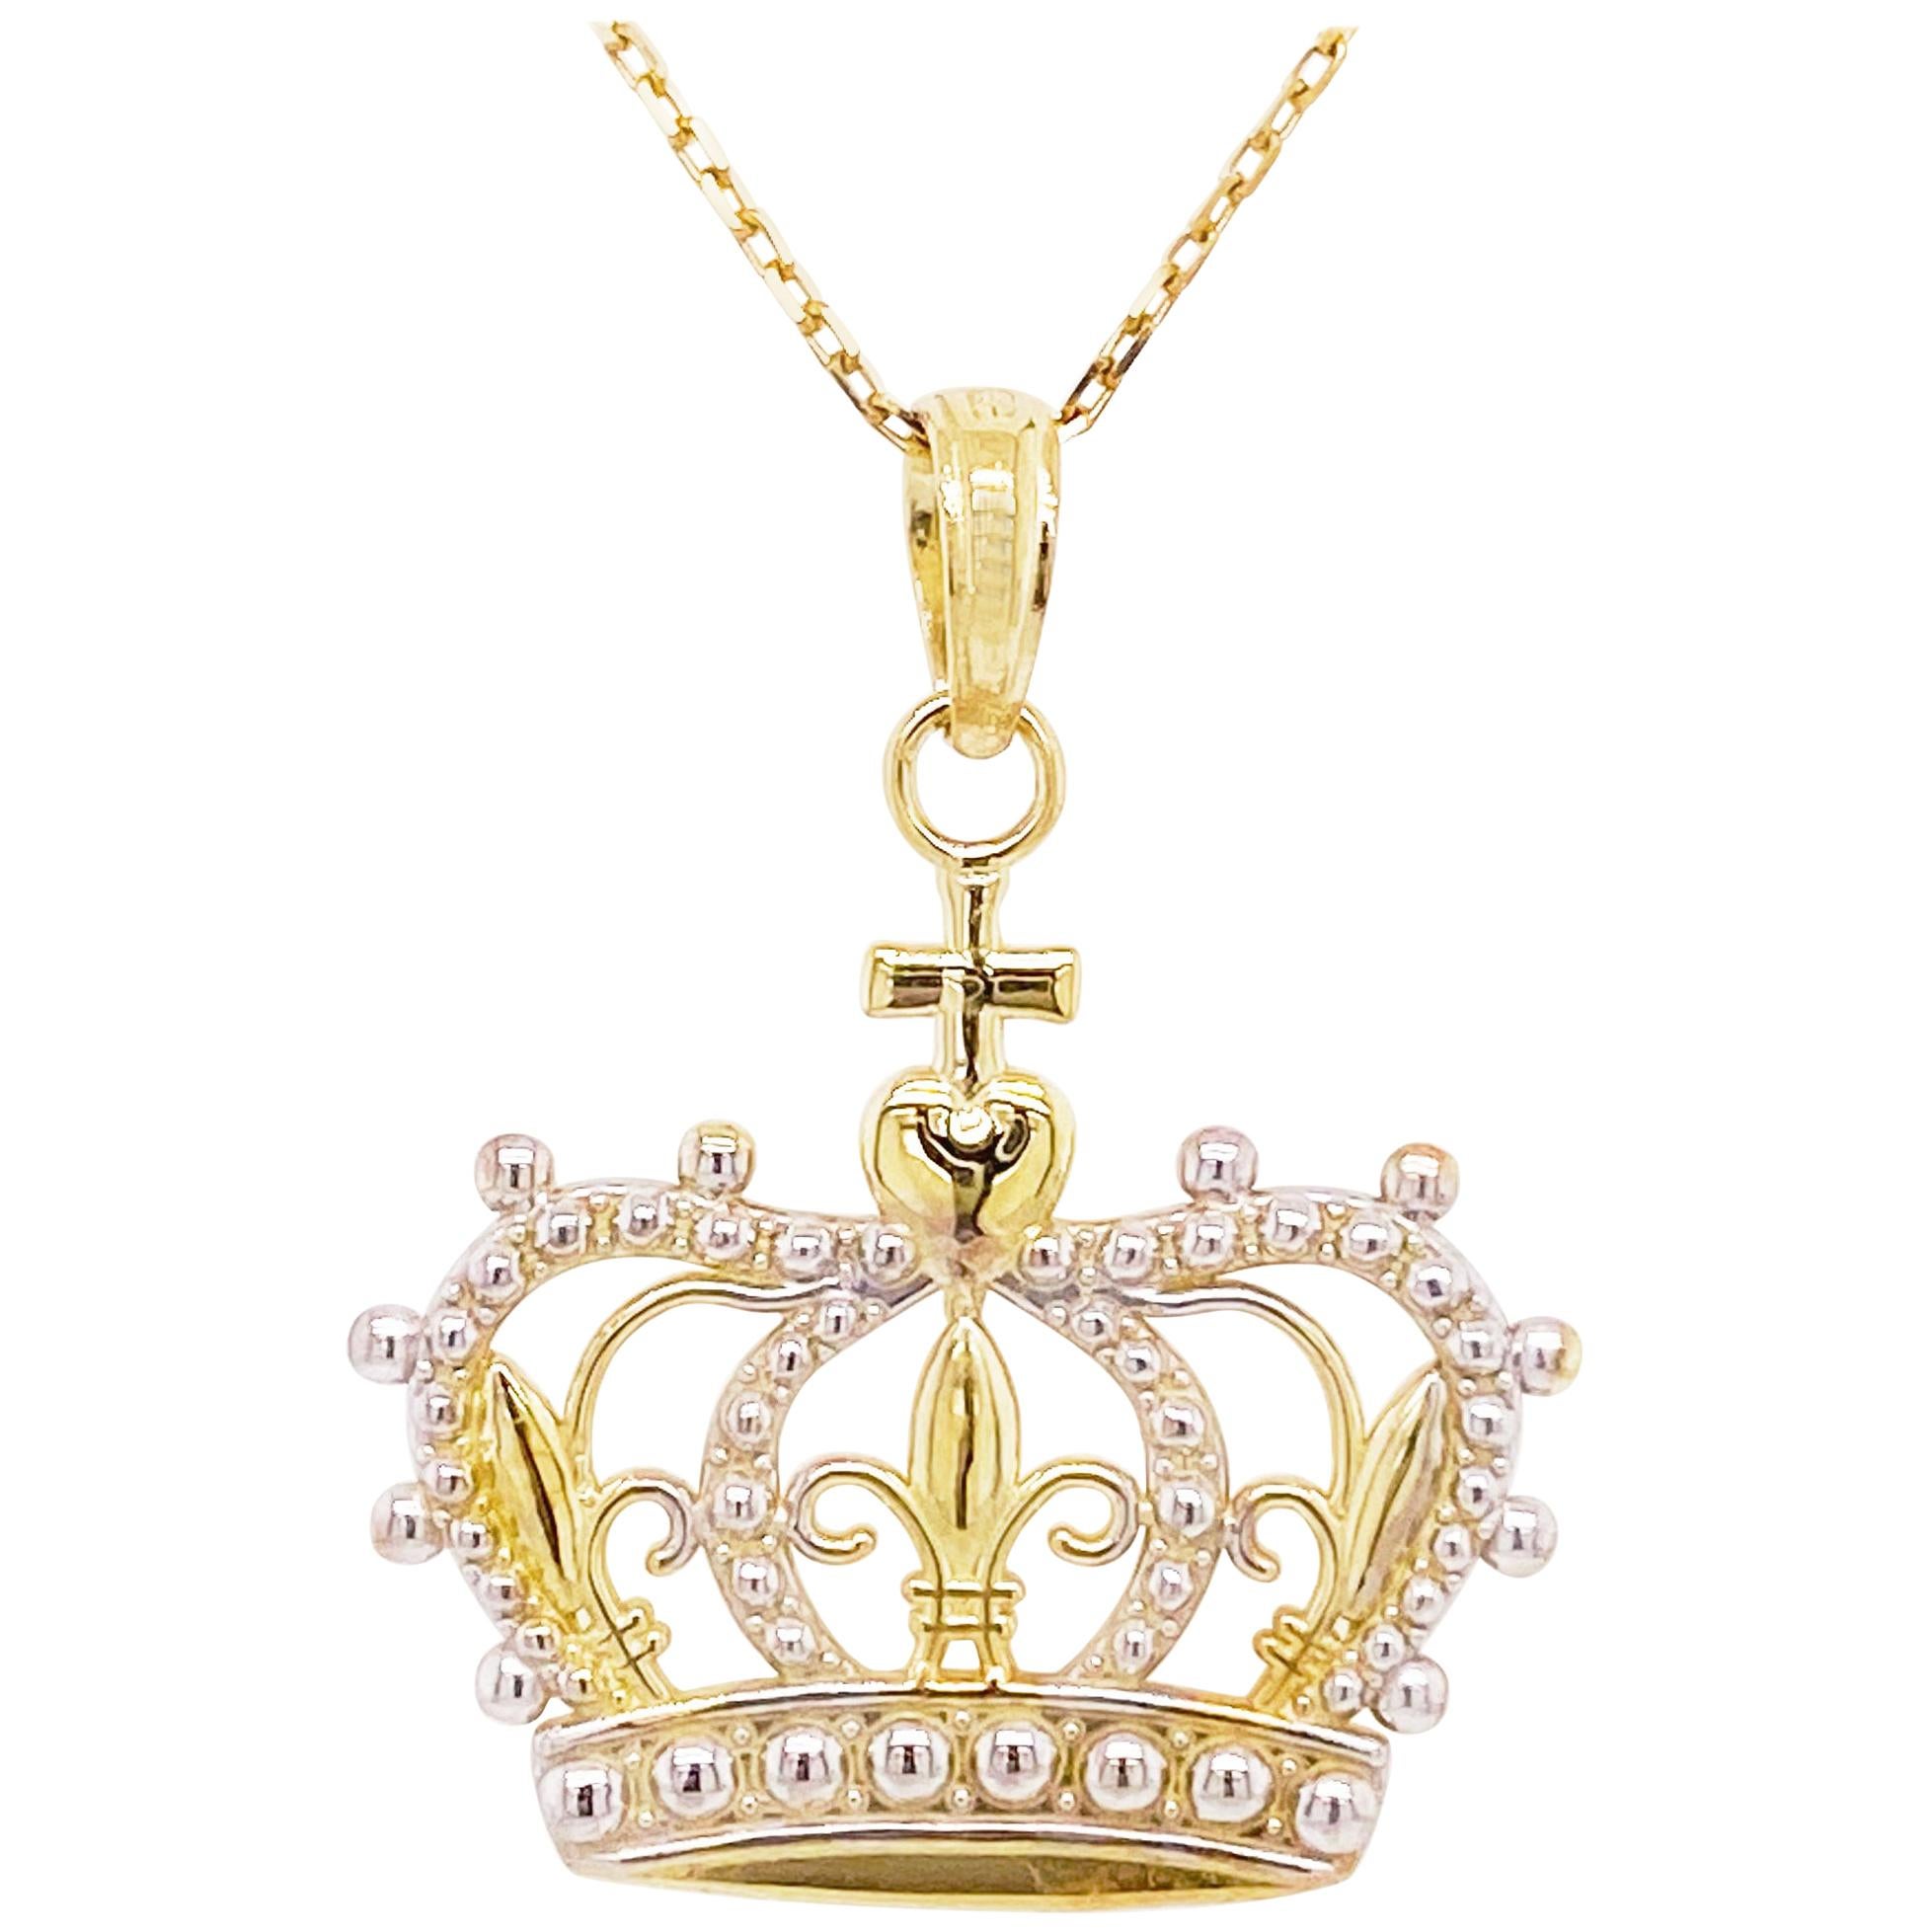 Gold Crown Necklace Pendant Mixed Metals You Are A Princess or Queen For Sale